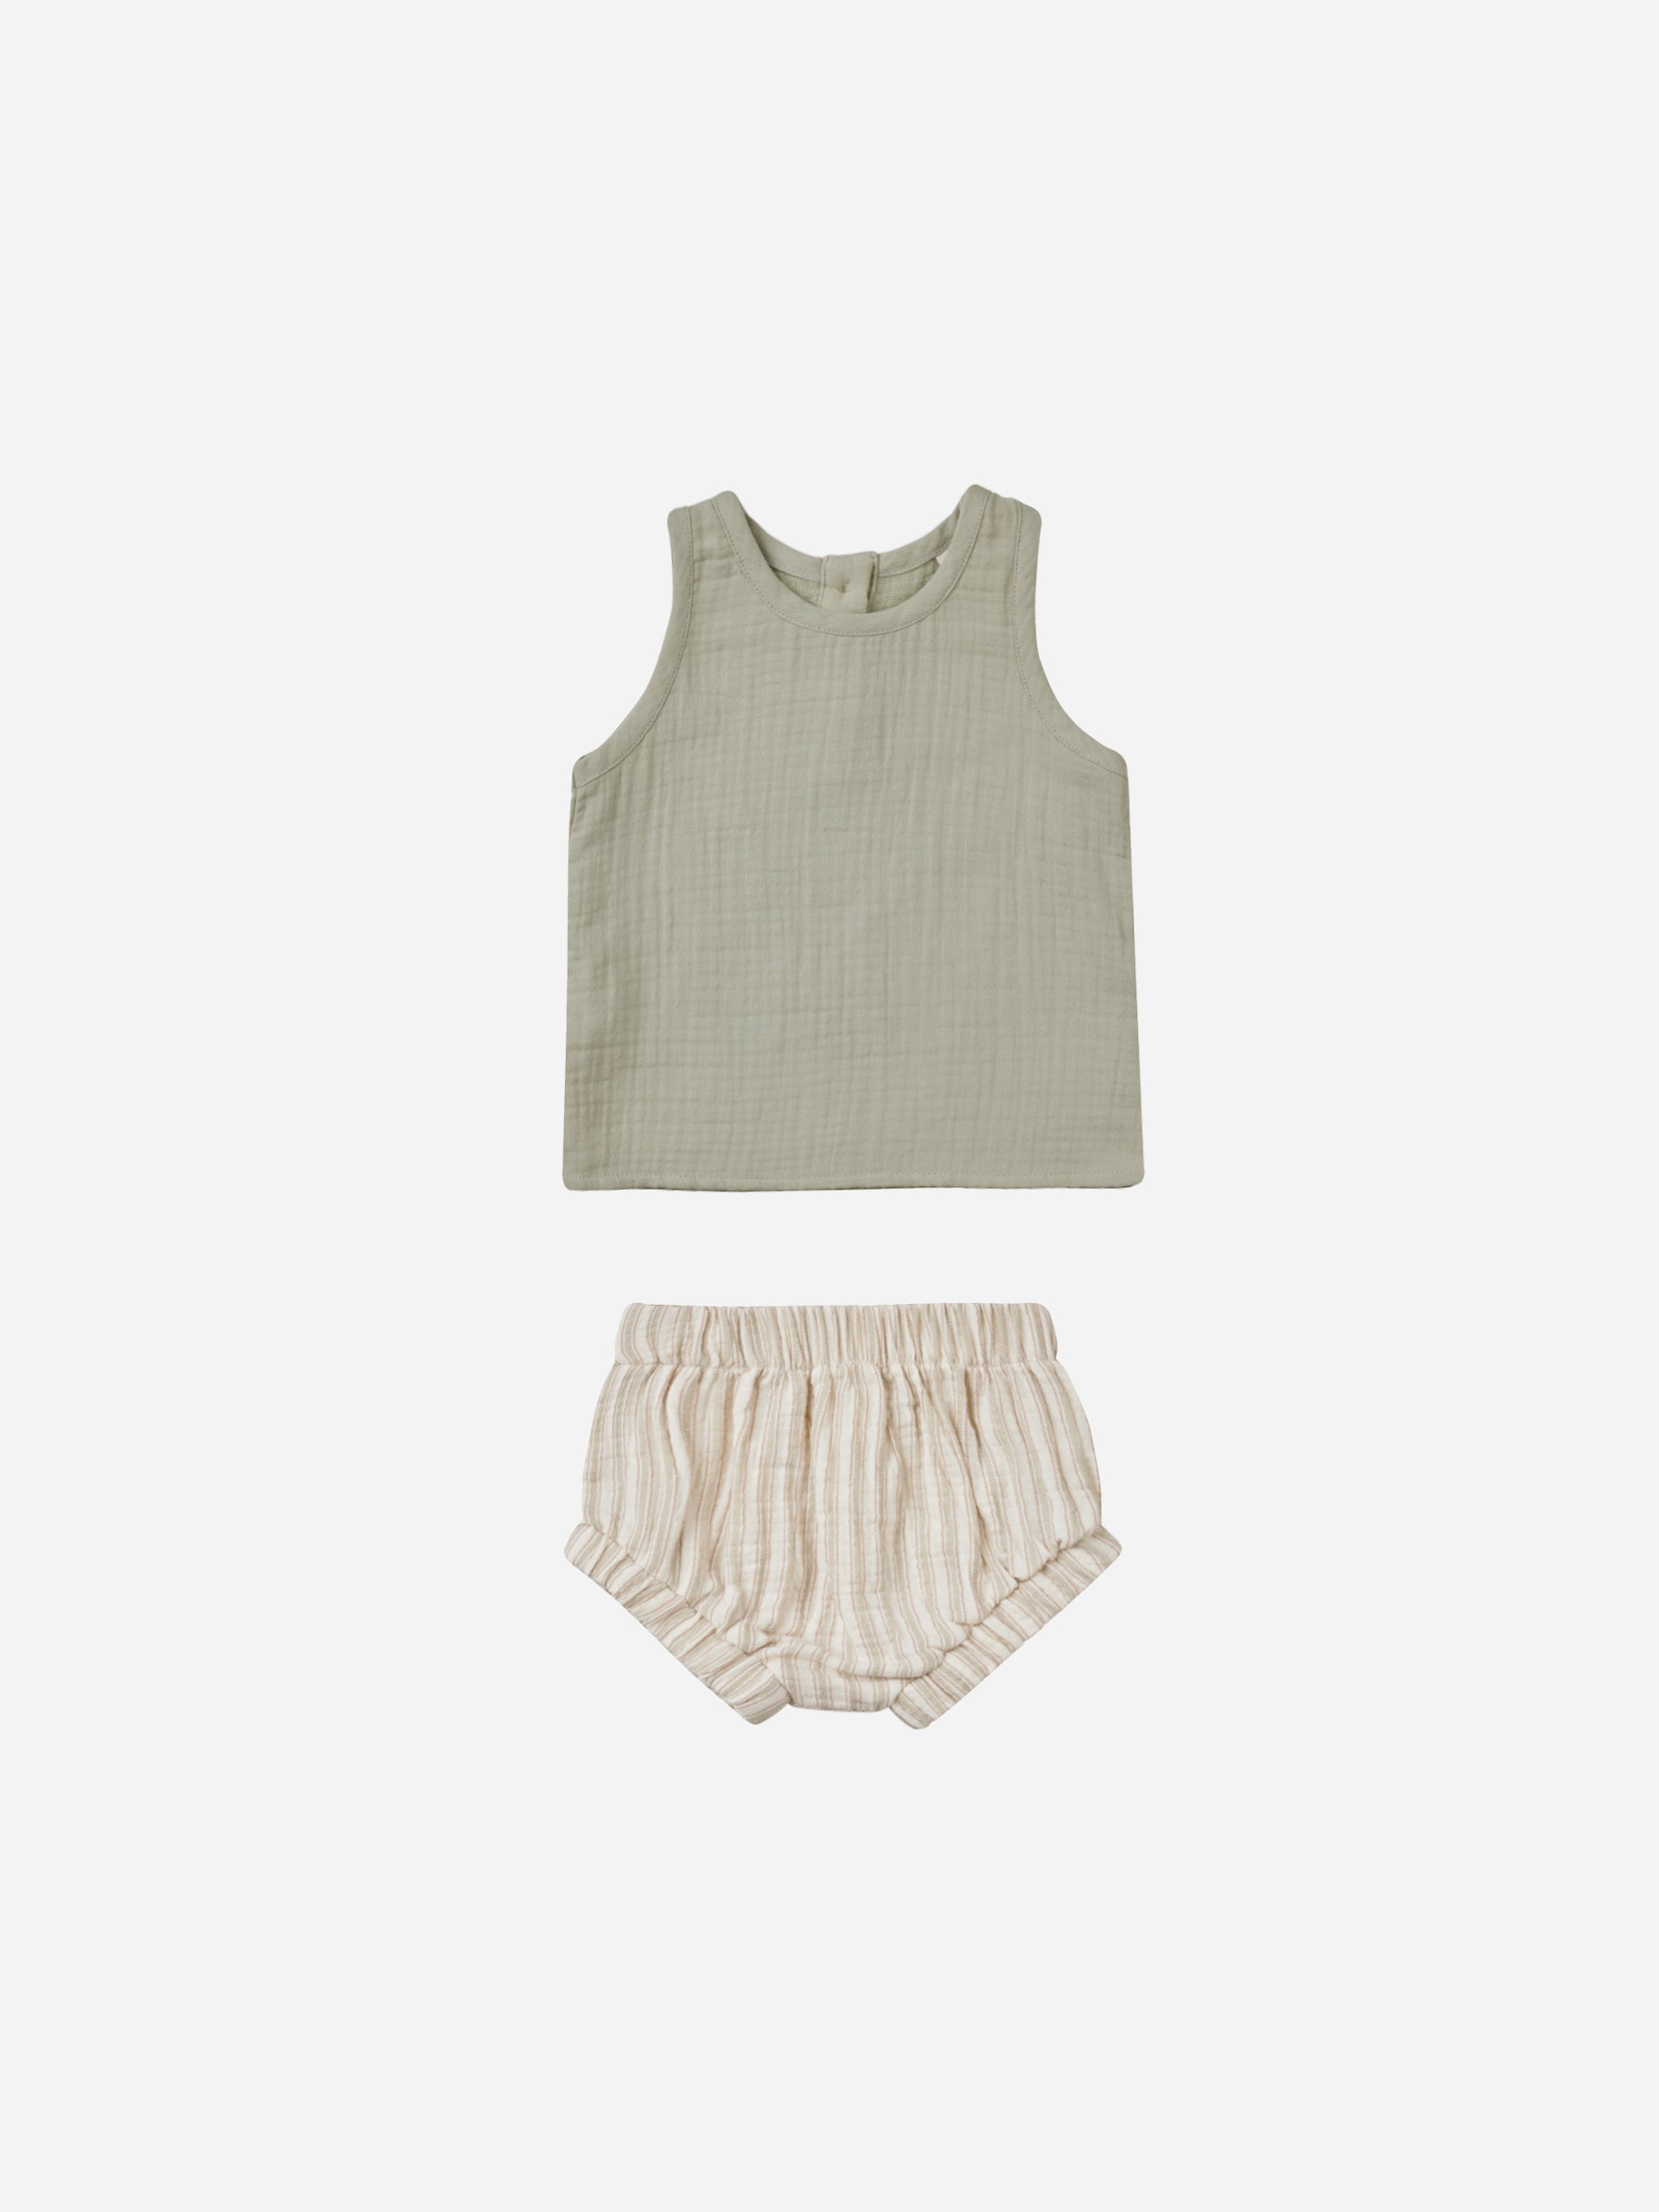 Woven Tank + Short Set || Sage Stripe - Rylee + Cru | Kids Clothes | Trendy Baby Clothes | Modern Infant Outfits |